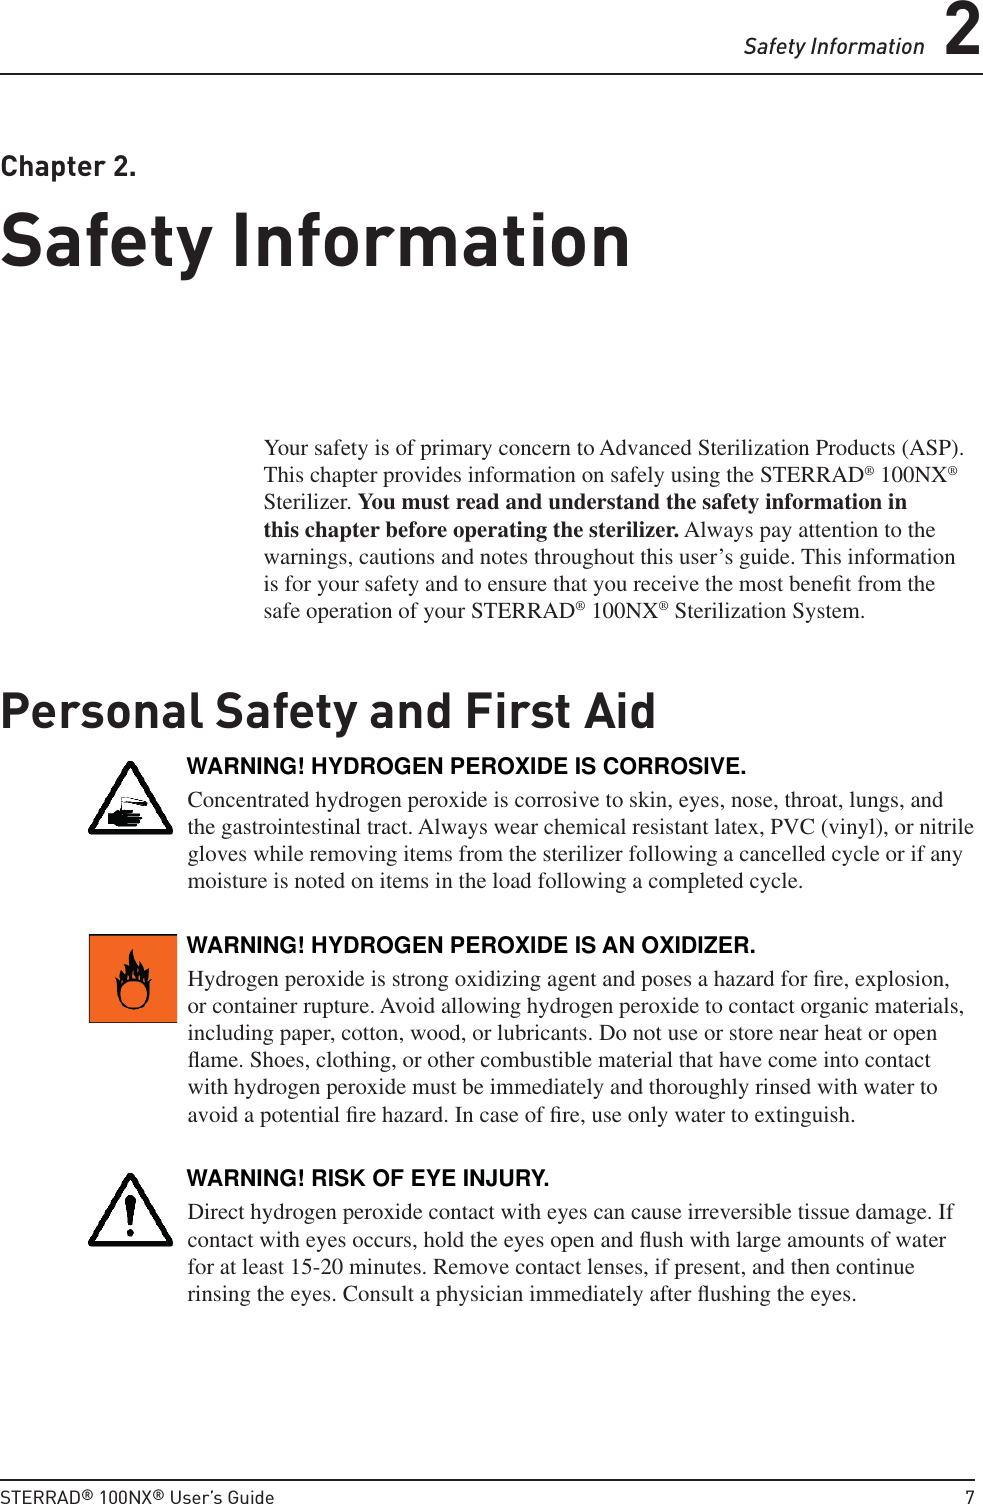 Safety Information 2STERRAD® 100NX® User’s Guide  7 Chapter  2.  Safety InformationSafety InformationYour safety is of primary concern to Advanced Sterilization Products (ASP). This chapter provides information on safely using the STERRAD® 100NX® Sterilizer. You must read and understand the safety information in this chapter before operating the sterilizer. Always pay attention to the warnings, cautions and notes throughout this user’s guide. This information is for your safety and to ensure that you receive the most beneﬁ t from the safe operation of your STERRAD® 100NX® Sterilization System.Personal Safety and First AidWARNING! HYDROGEN PEROXIDE IS CORROSIVE.Concentrated hydrogen peroxide is corrosive to skin, eyes, nose, throat, lungs, and the gastrointestinal tract. Always wear chemical resistant latex, PVC (vinyl), or nitrile gloves while removing items from the sterilizer following a cancelled cycle or if any moisture is noted on items in the load following a completed cycle.WARNING! HYDROGEN PEROXIDE IS AN OXIDIZER.Hydrogen peroxide is strong oxidizing agent and poses a hazard for ﬁ re, explosion, or container rupture. Avoid allowing hydrogen peroxide to contact organic materials, including paper, cotton, wood, or lubricants. Do not use or store near heat or open ﬂ ame. Shoes, clothing, or other combustible material that have come into contact with hydrogen peroxide must be immediately and thoroughly rinsed with water to avoid a potential ﬁ re hazard. In case of ﬁ re, use only water to extinguish.WARNING! RISK OF EYE INJURY.Direct hydrogen peroxide contact with eyes can cause irreversible tissue damage. If contact with eyes occurs, hold the eyes open and ﬂ ush with large amounts of water for at least 15-20 minutes. Remove contact lenses, if present, and then continue rinsing the eyes. Consult a physician immediately after ﬂ ushing the eyes.